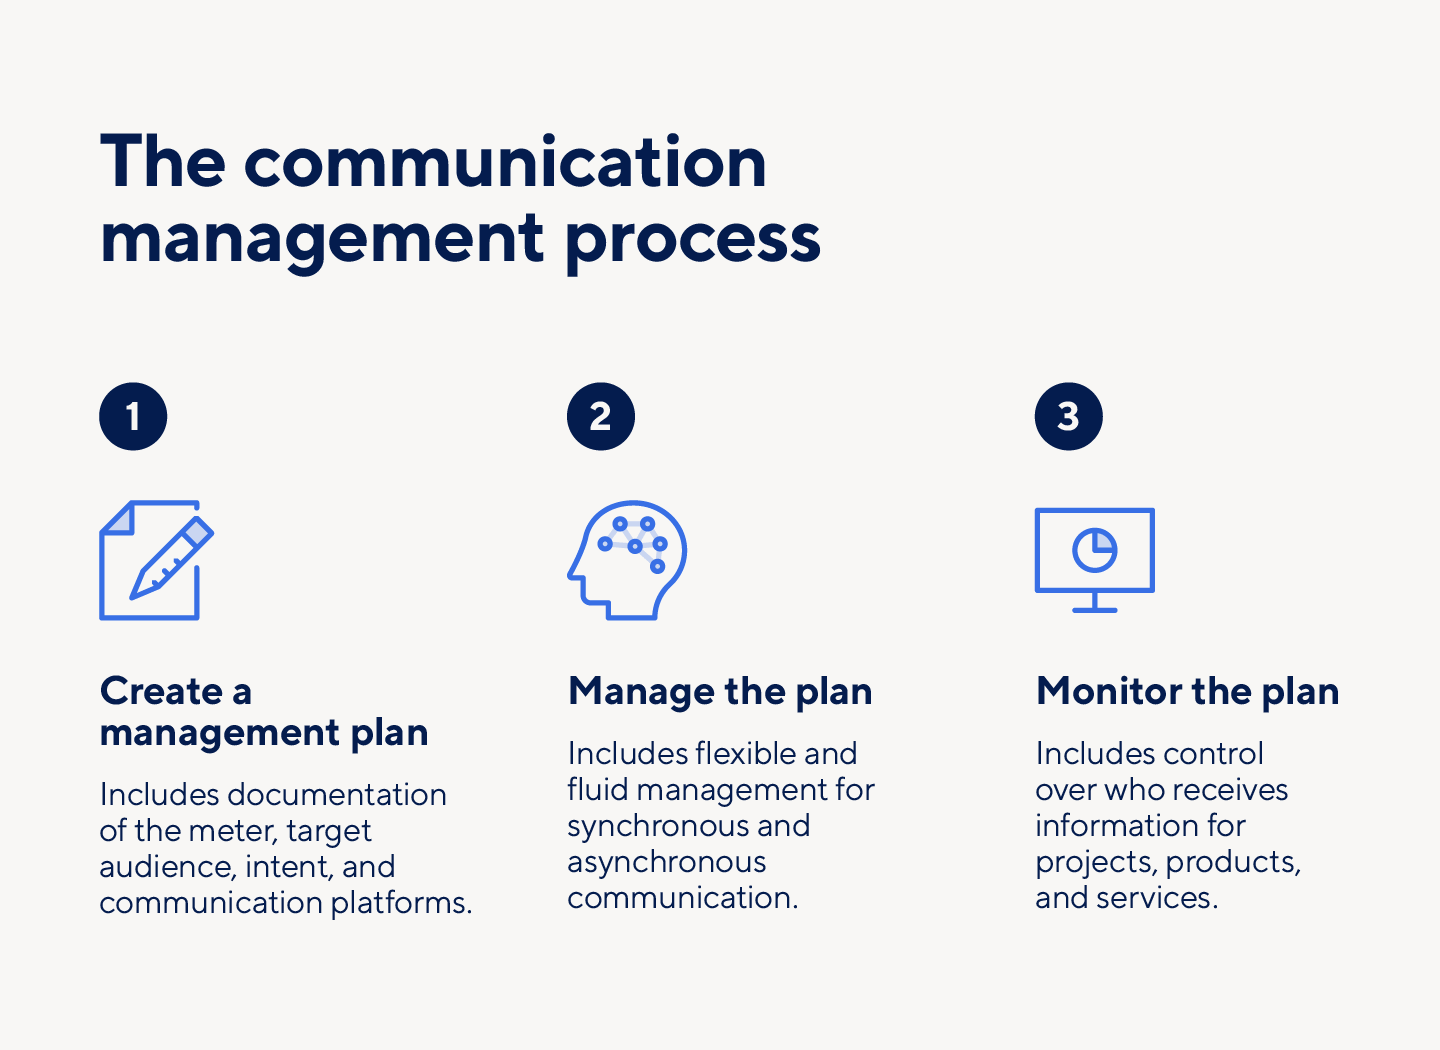 The communication management process includes planning, managing, and monitoring